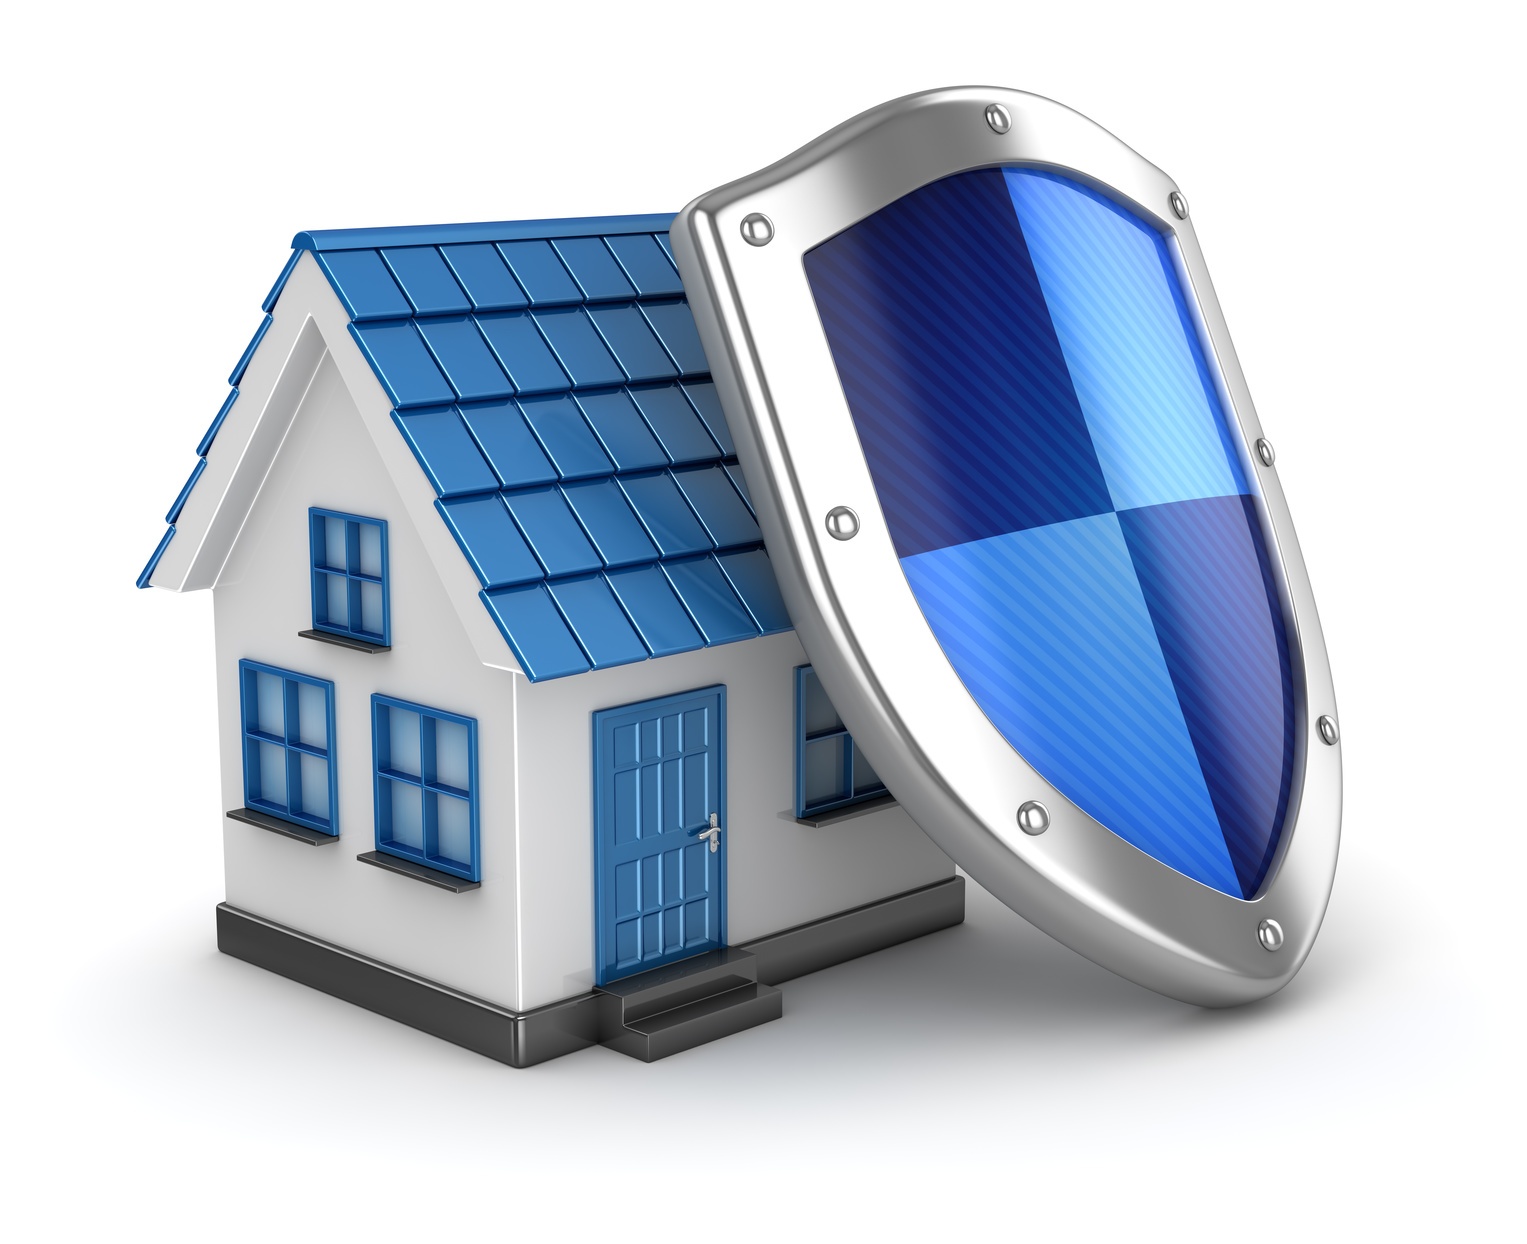 Home Security Tech: But, are Smart Homes Safer?